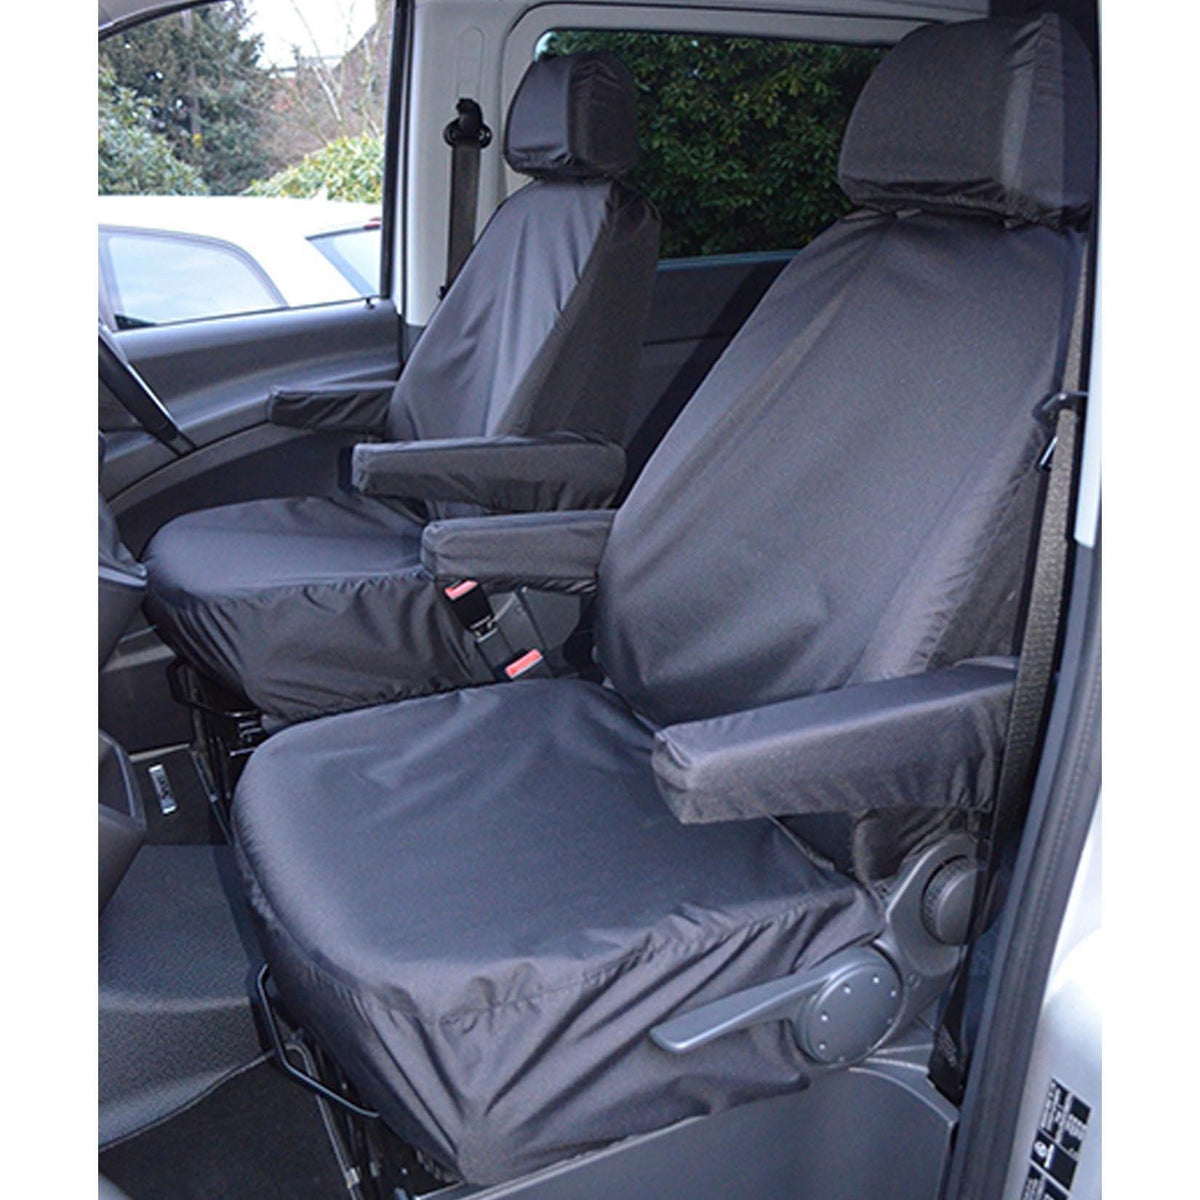 MERCEDES VITO 2003-2015 FRONT SINGLE SEAT COVERS - BLACK - Storm Xccessories2